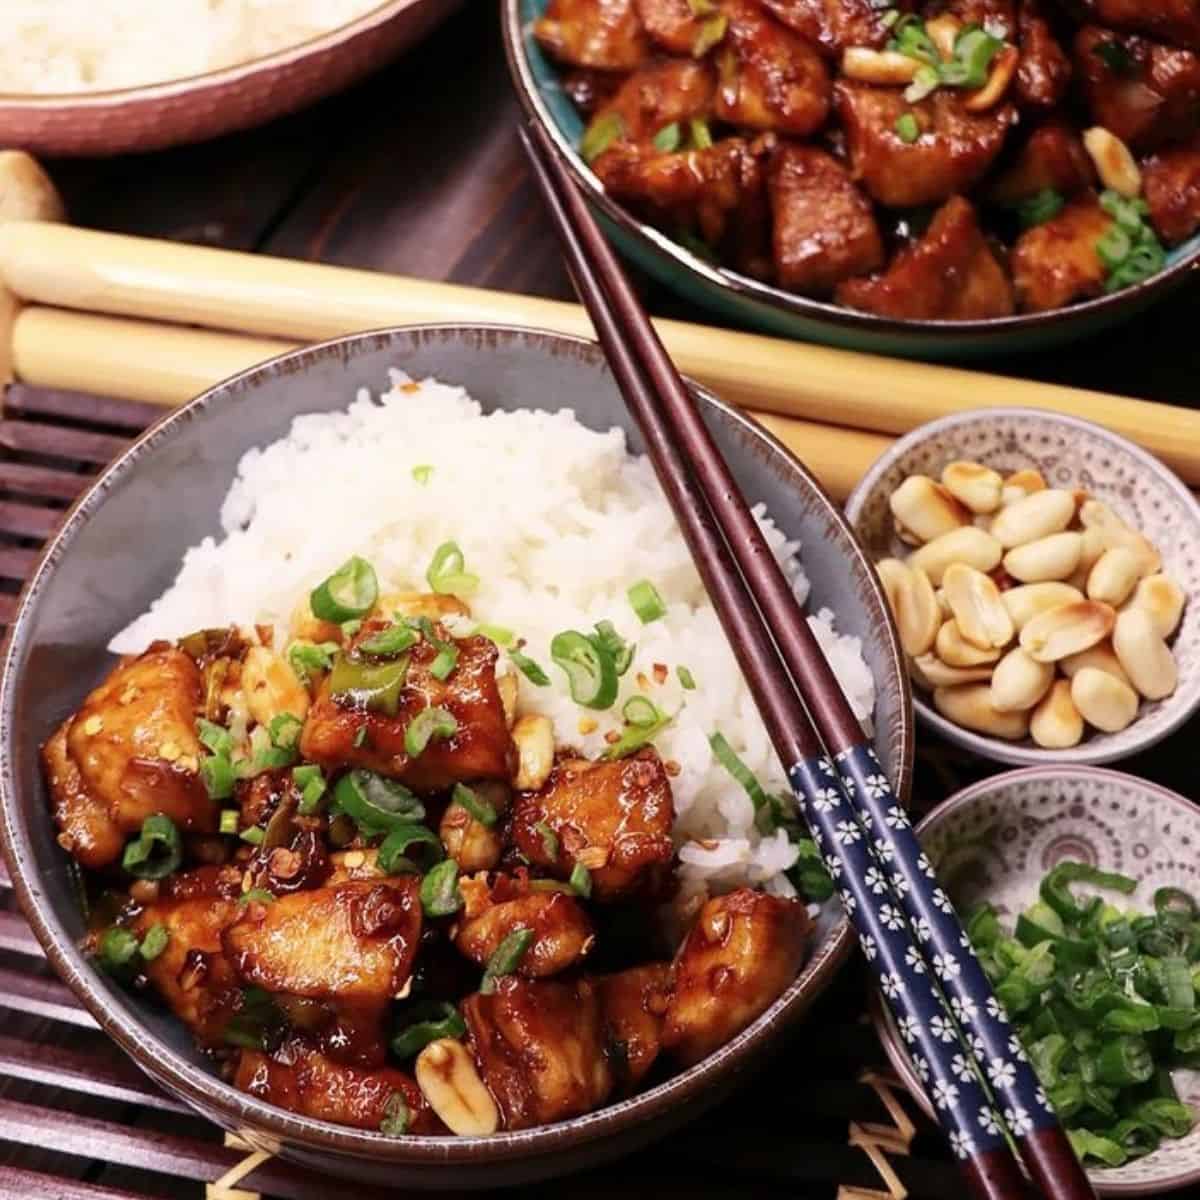 Kung pao chicken with rice and spring onions